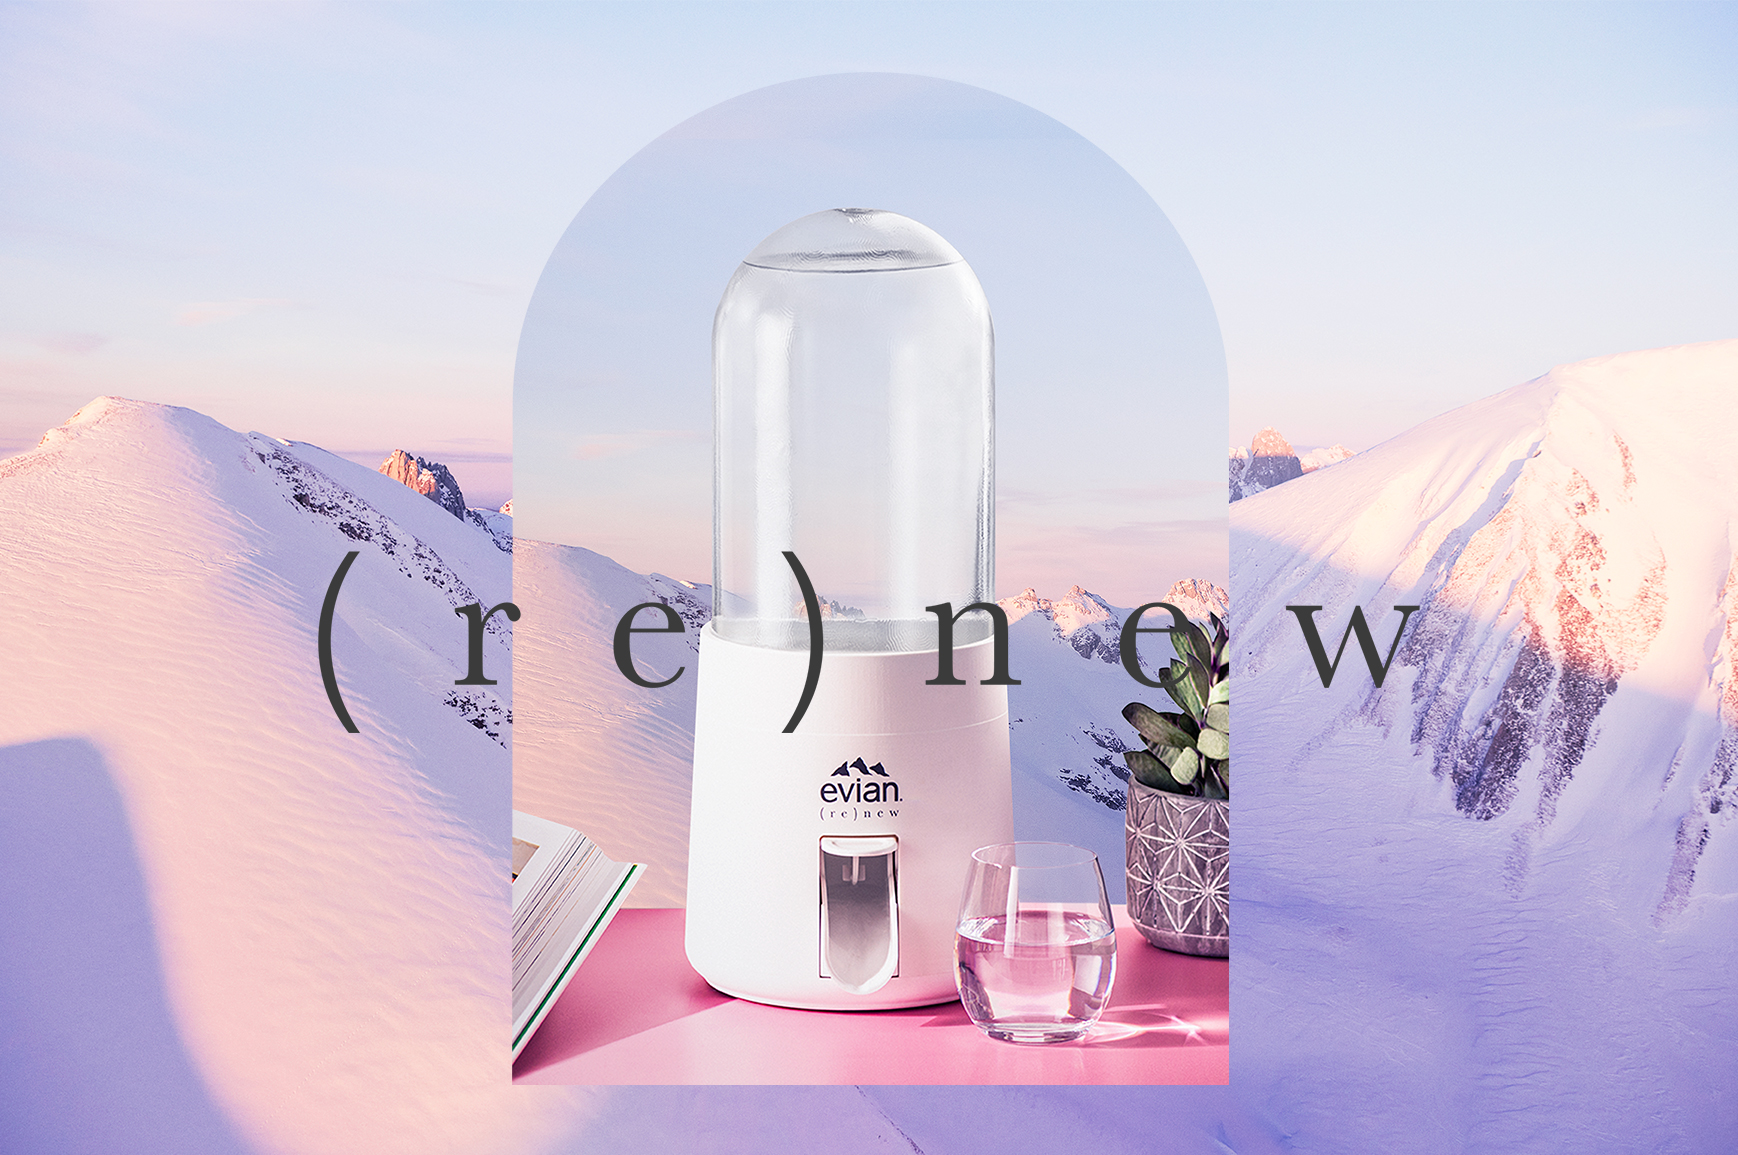 evian (re)new — (re)think the way you drink